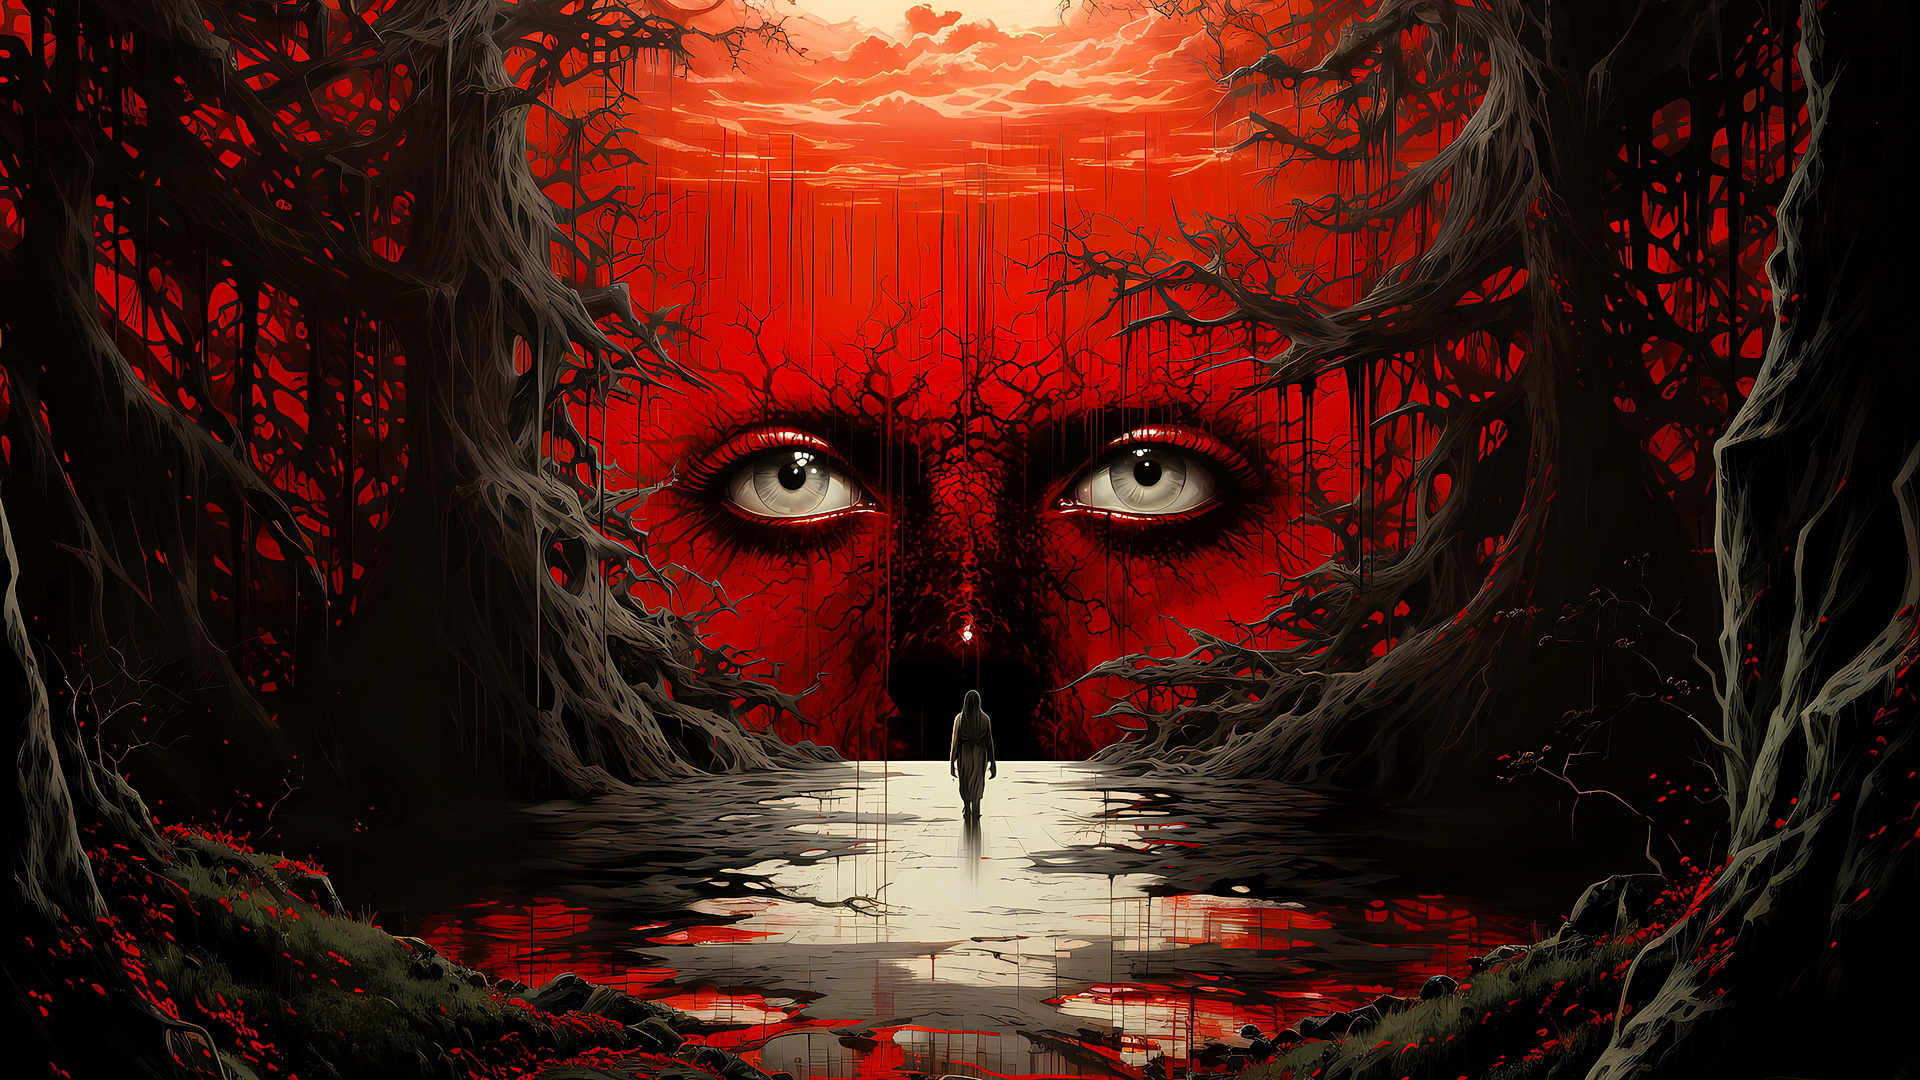 A drawing of a red face in the woods and a girl